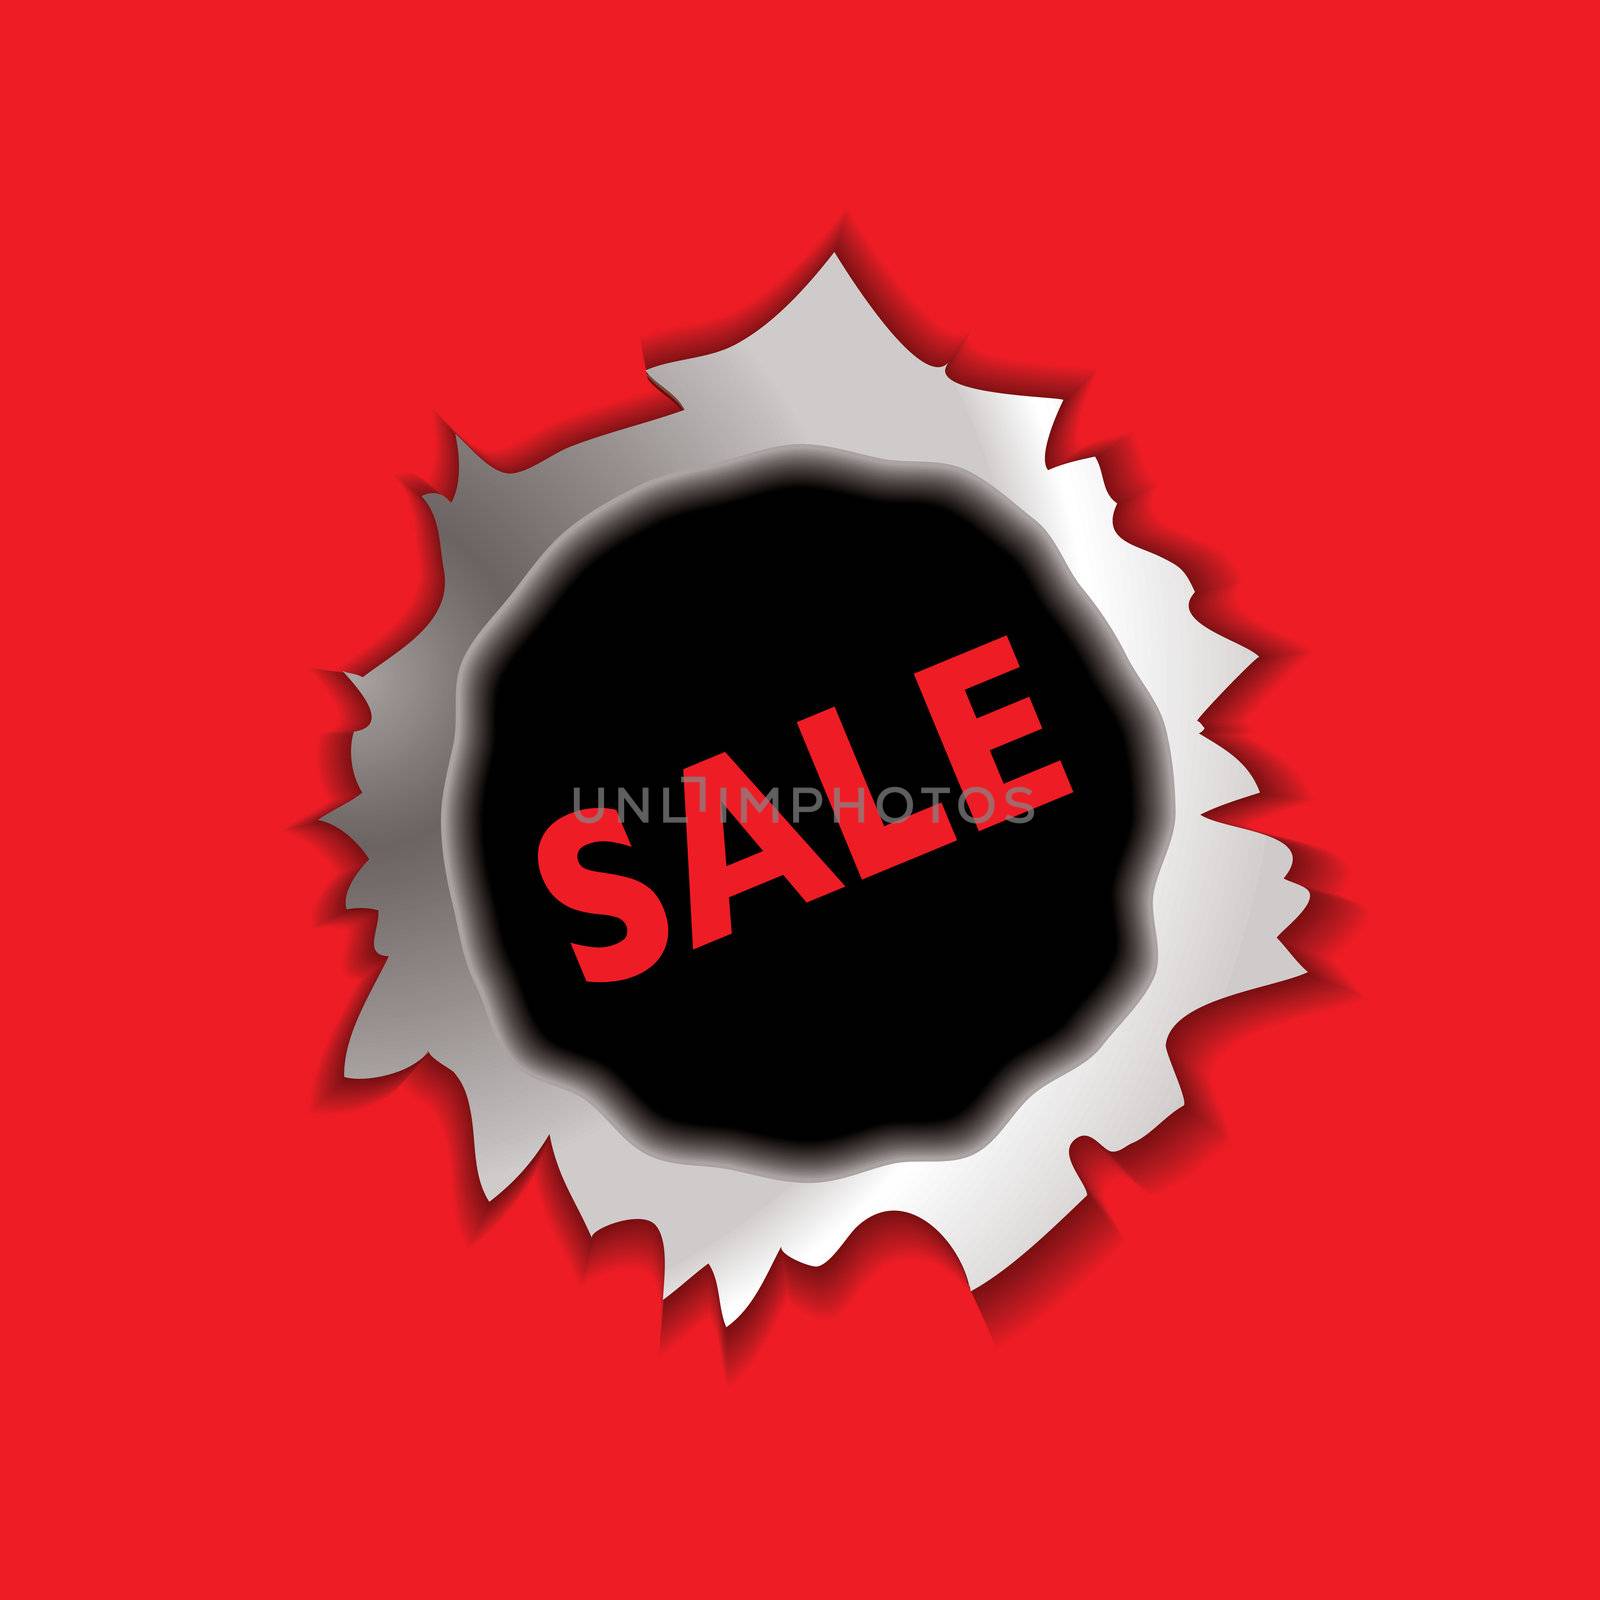 metal bullet hole with sale icon and red background